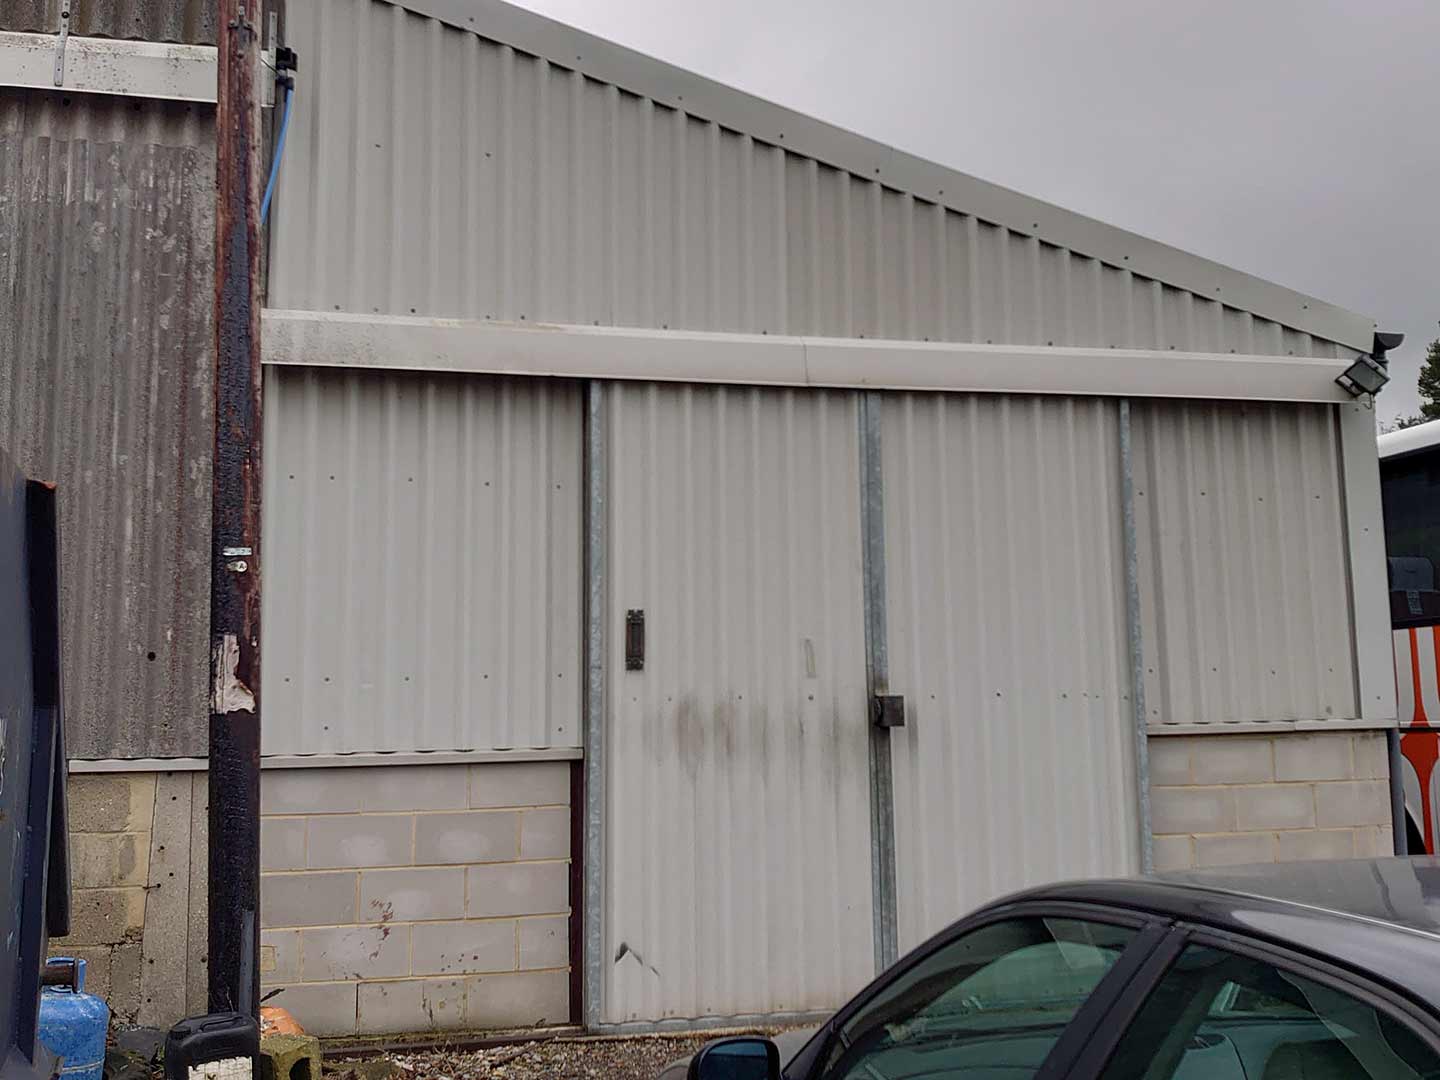 The front of our workshop, where most of our work in producing and machining parts is done. Take a look!